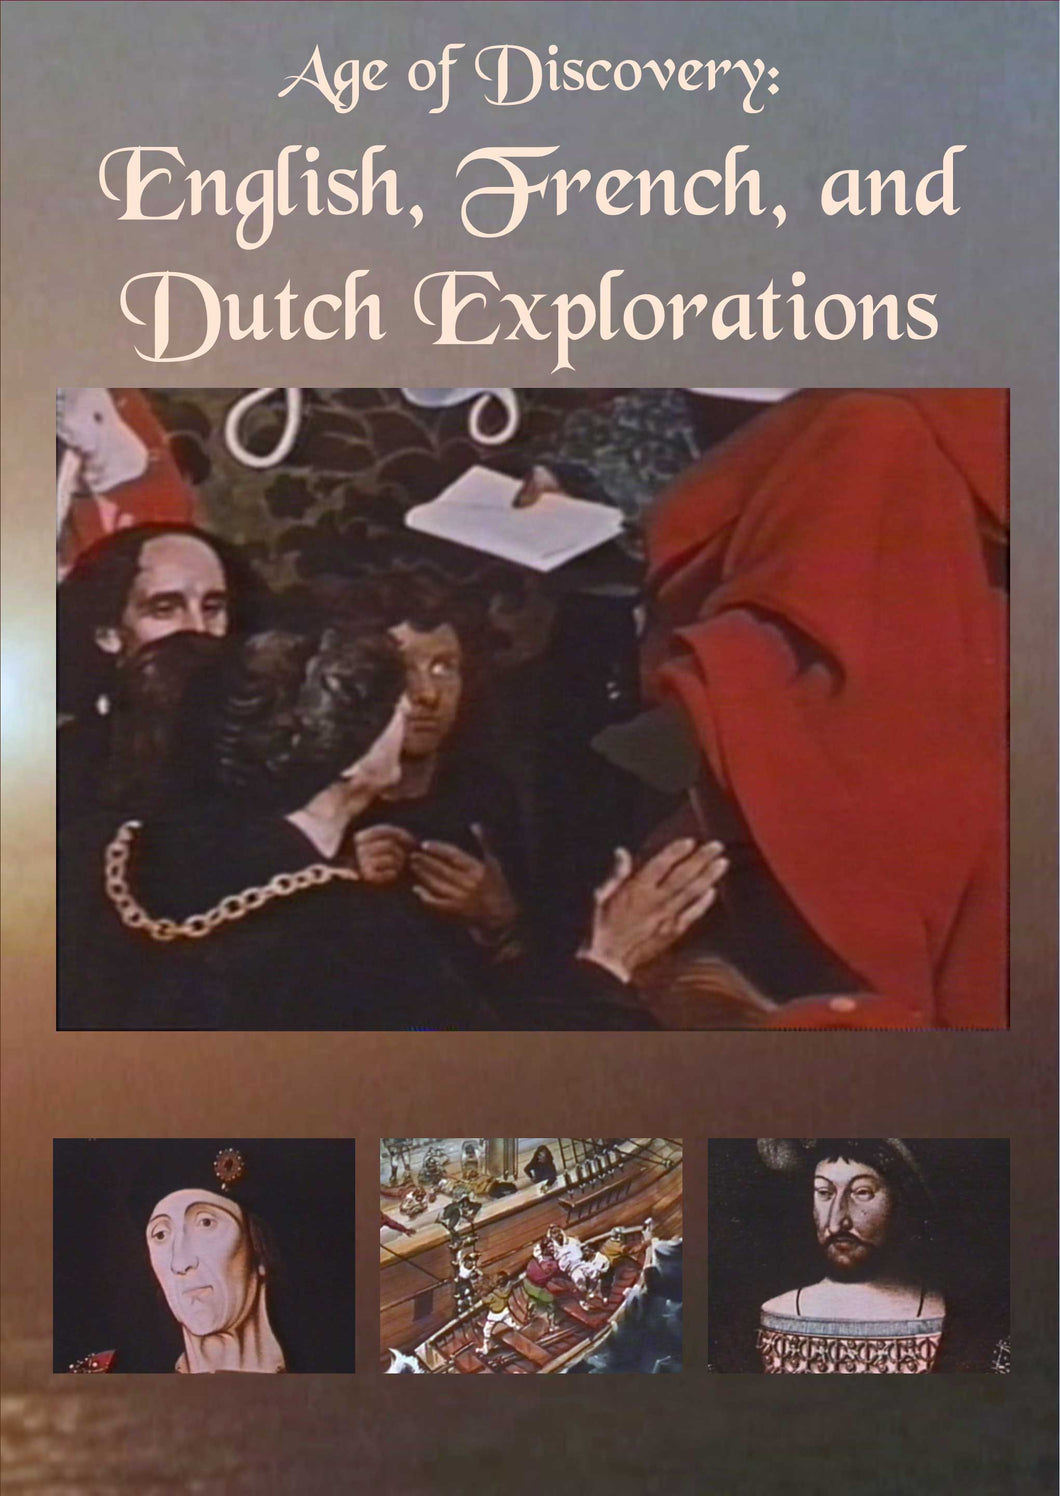 Age of Discovery: English, French, and Dutch Explorations